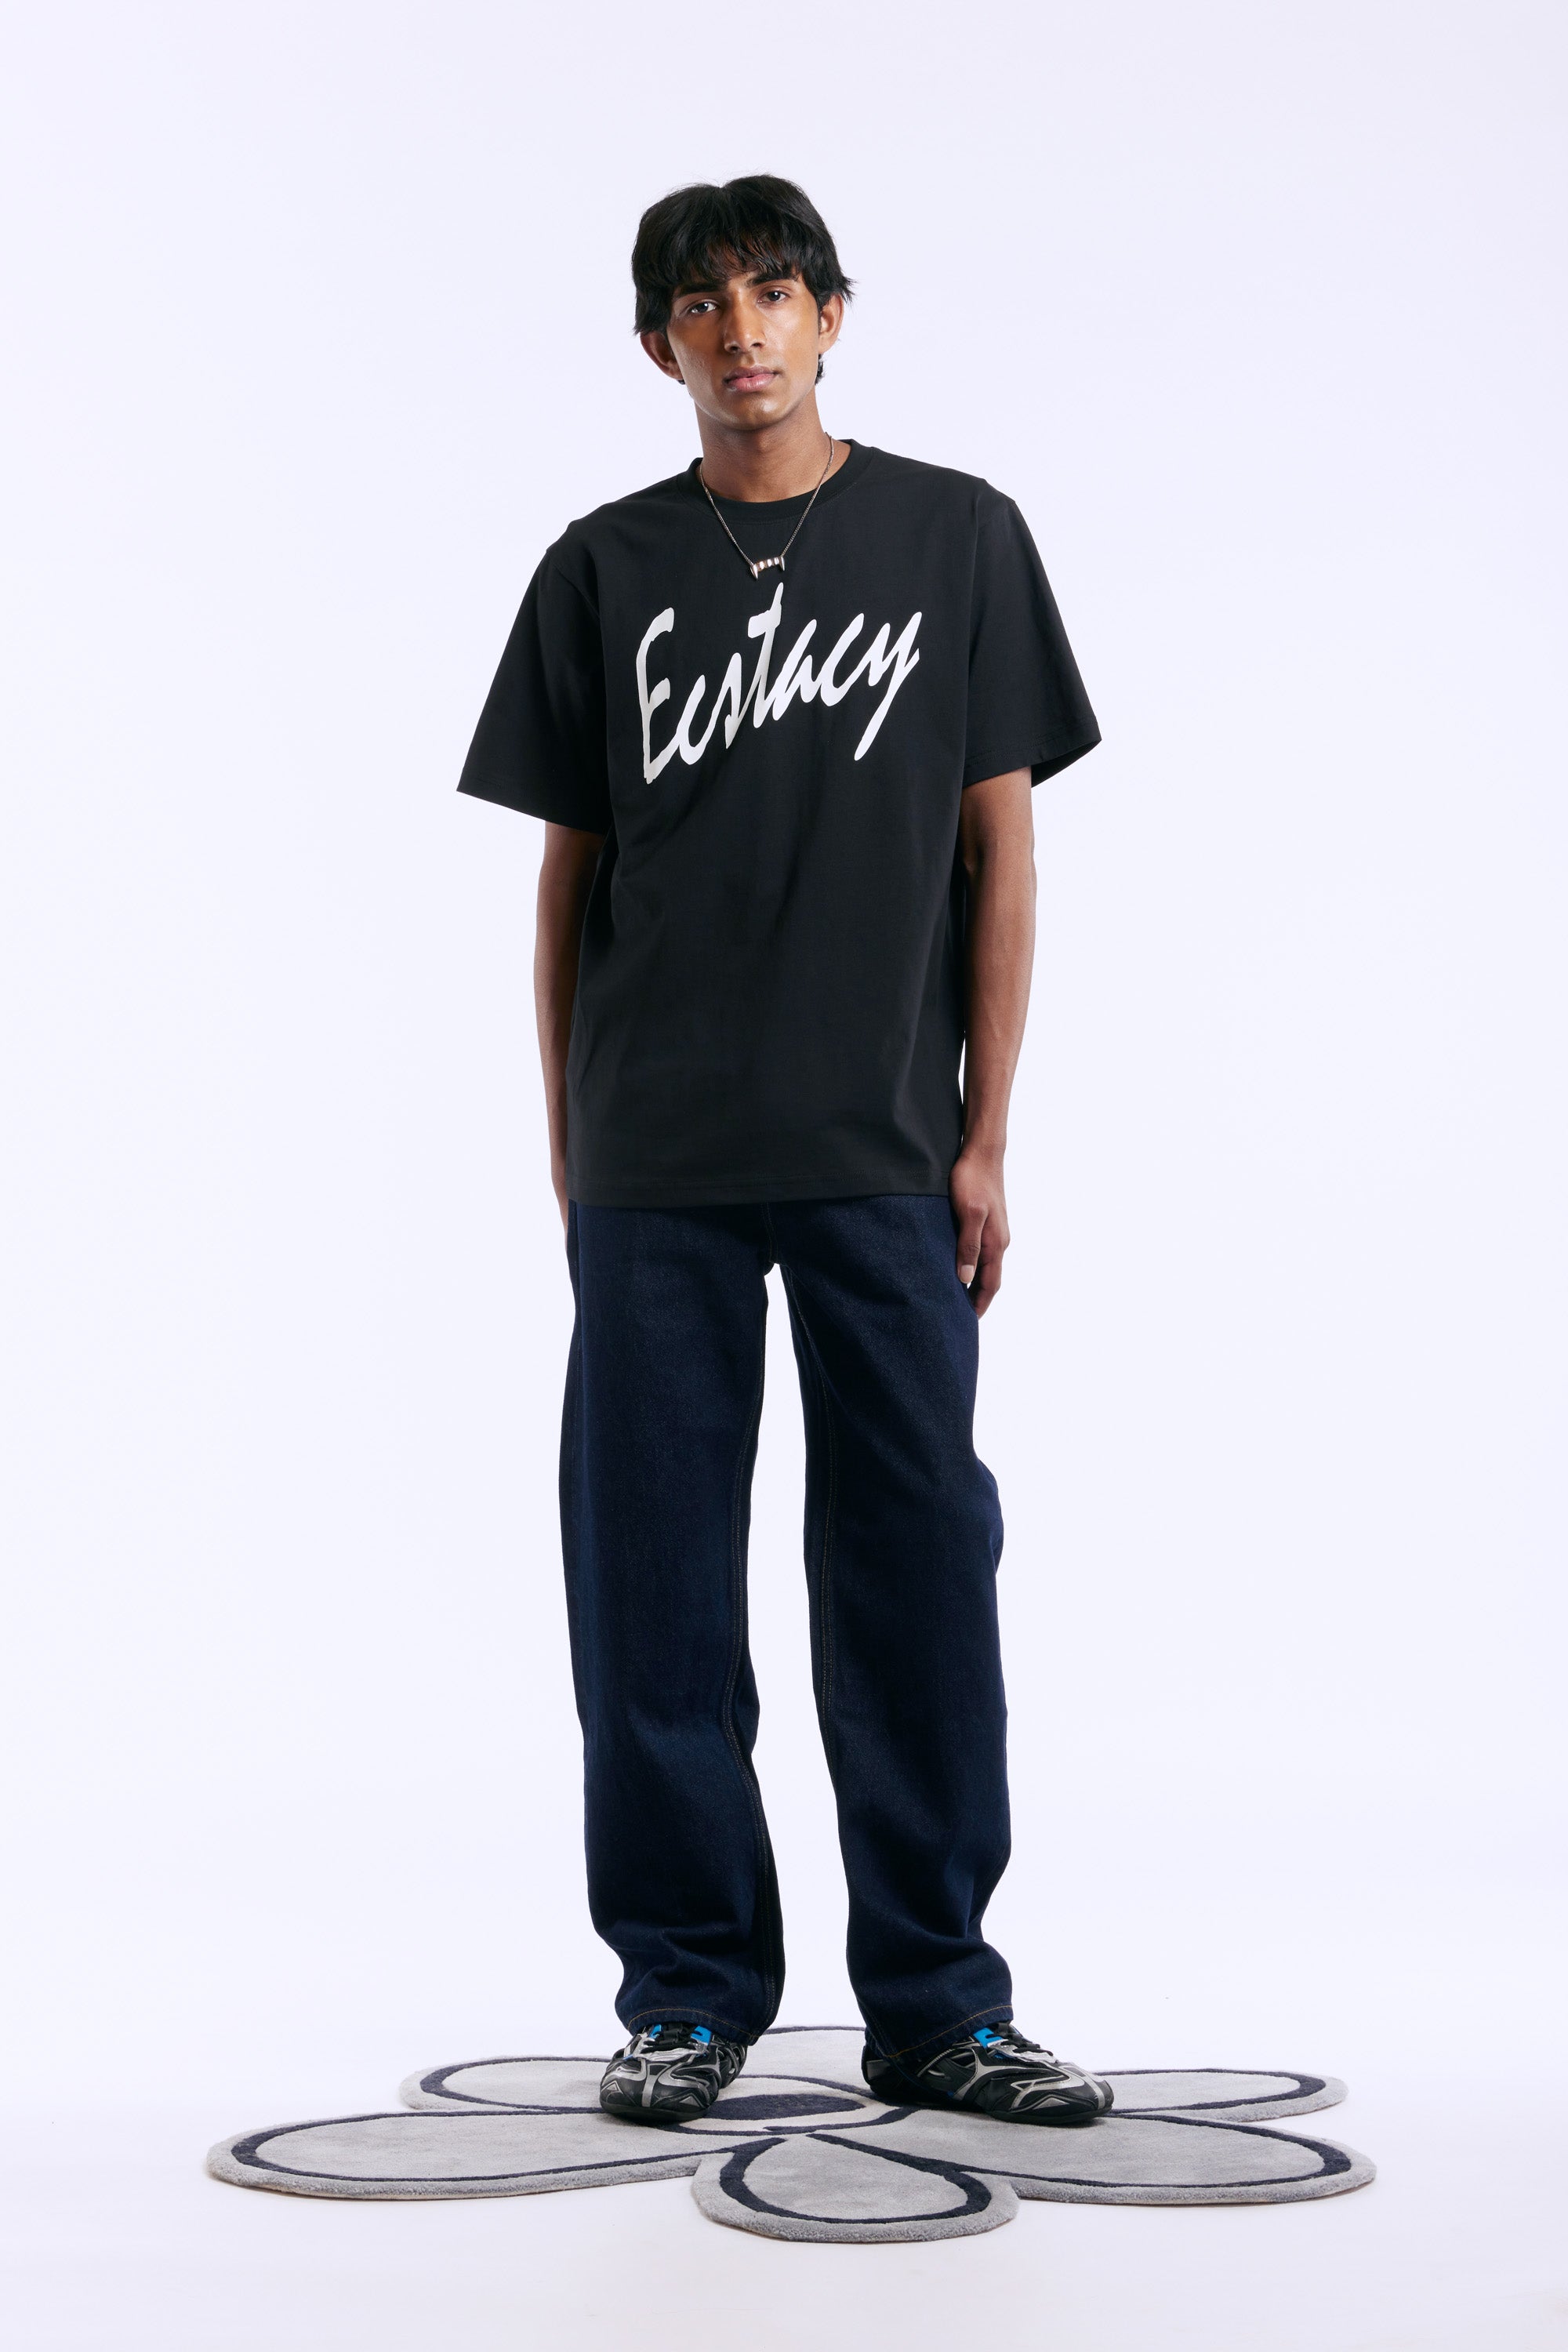 The P. WORLD ECSTACY SS TEE  available online with global shipping, and in PAM Stores Melbourne and Sydney.